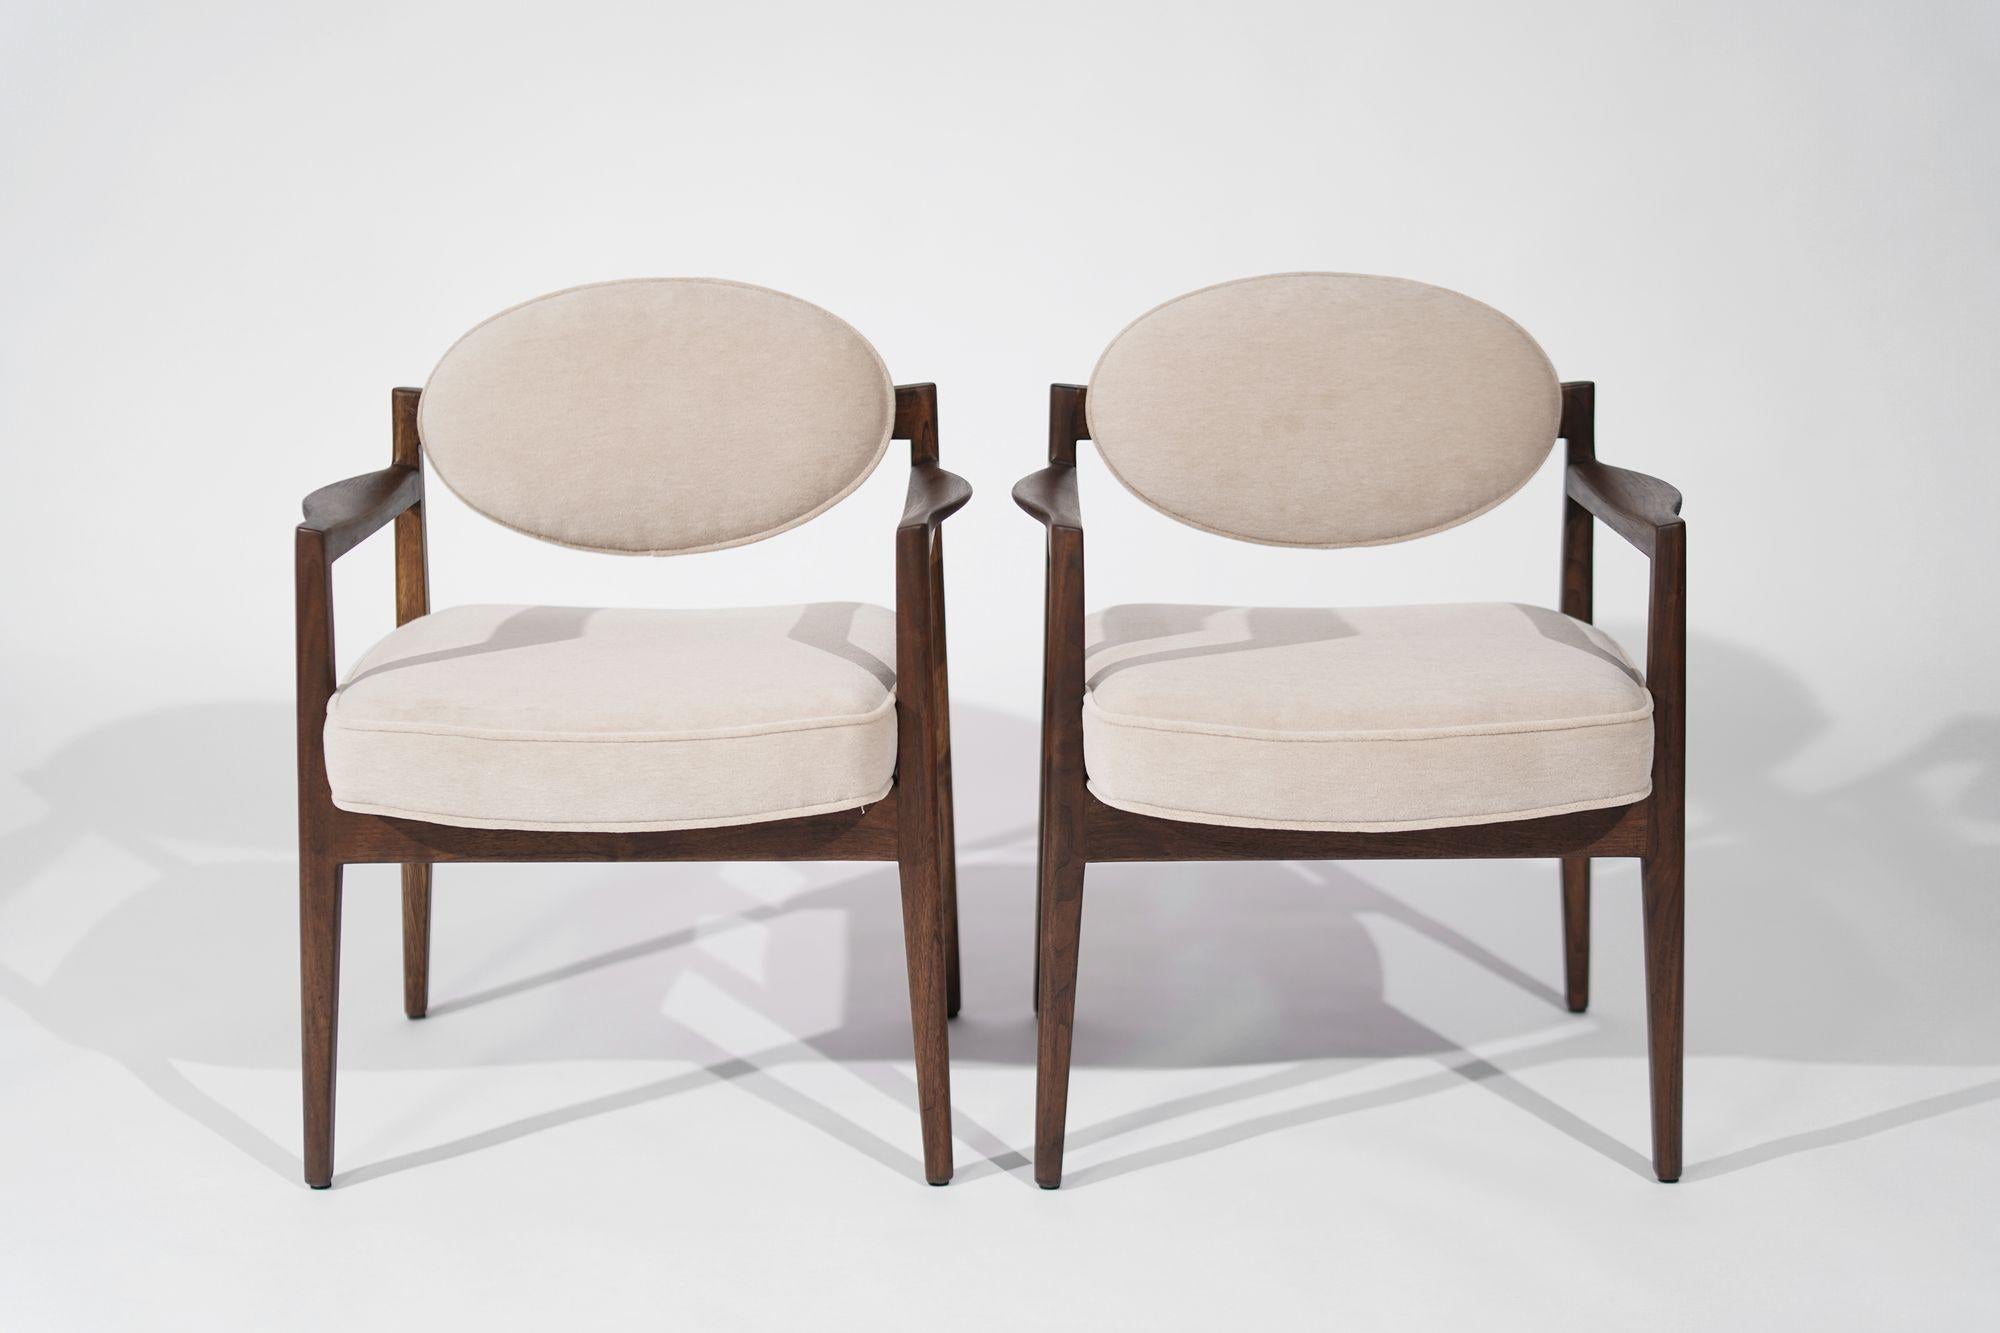 20th Century Jens Risom Walnut Armchairs in Natural Mohair, C. 1950s For Sale